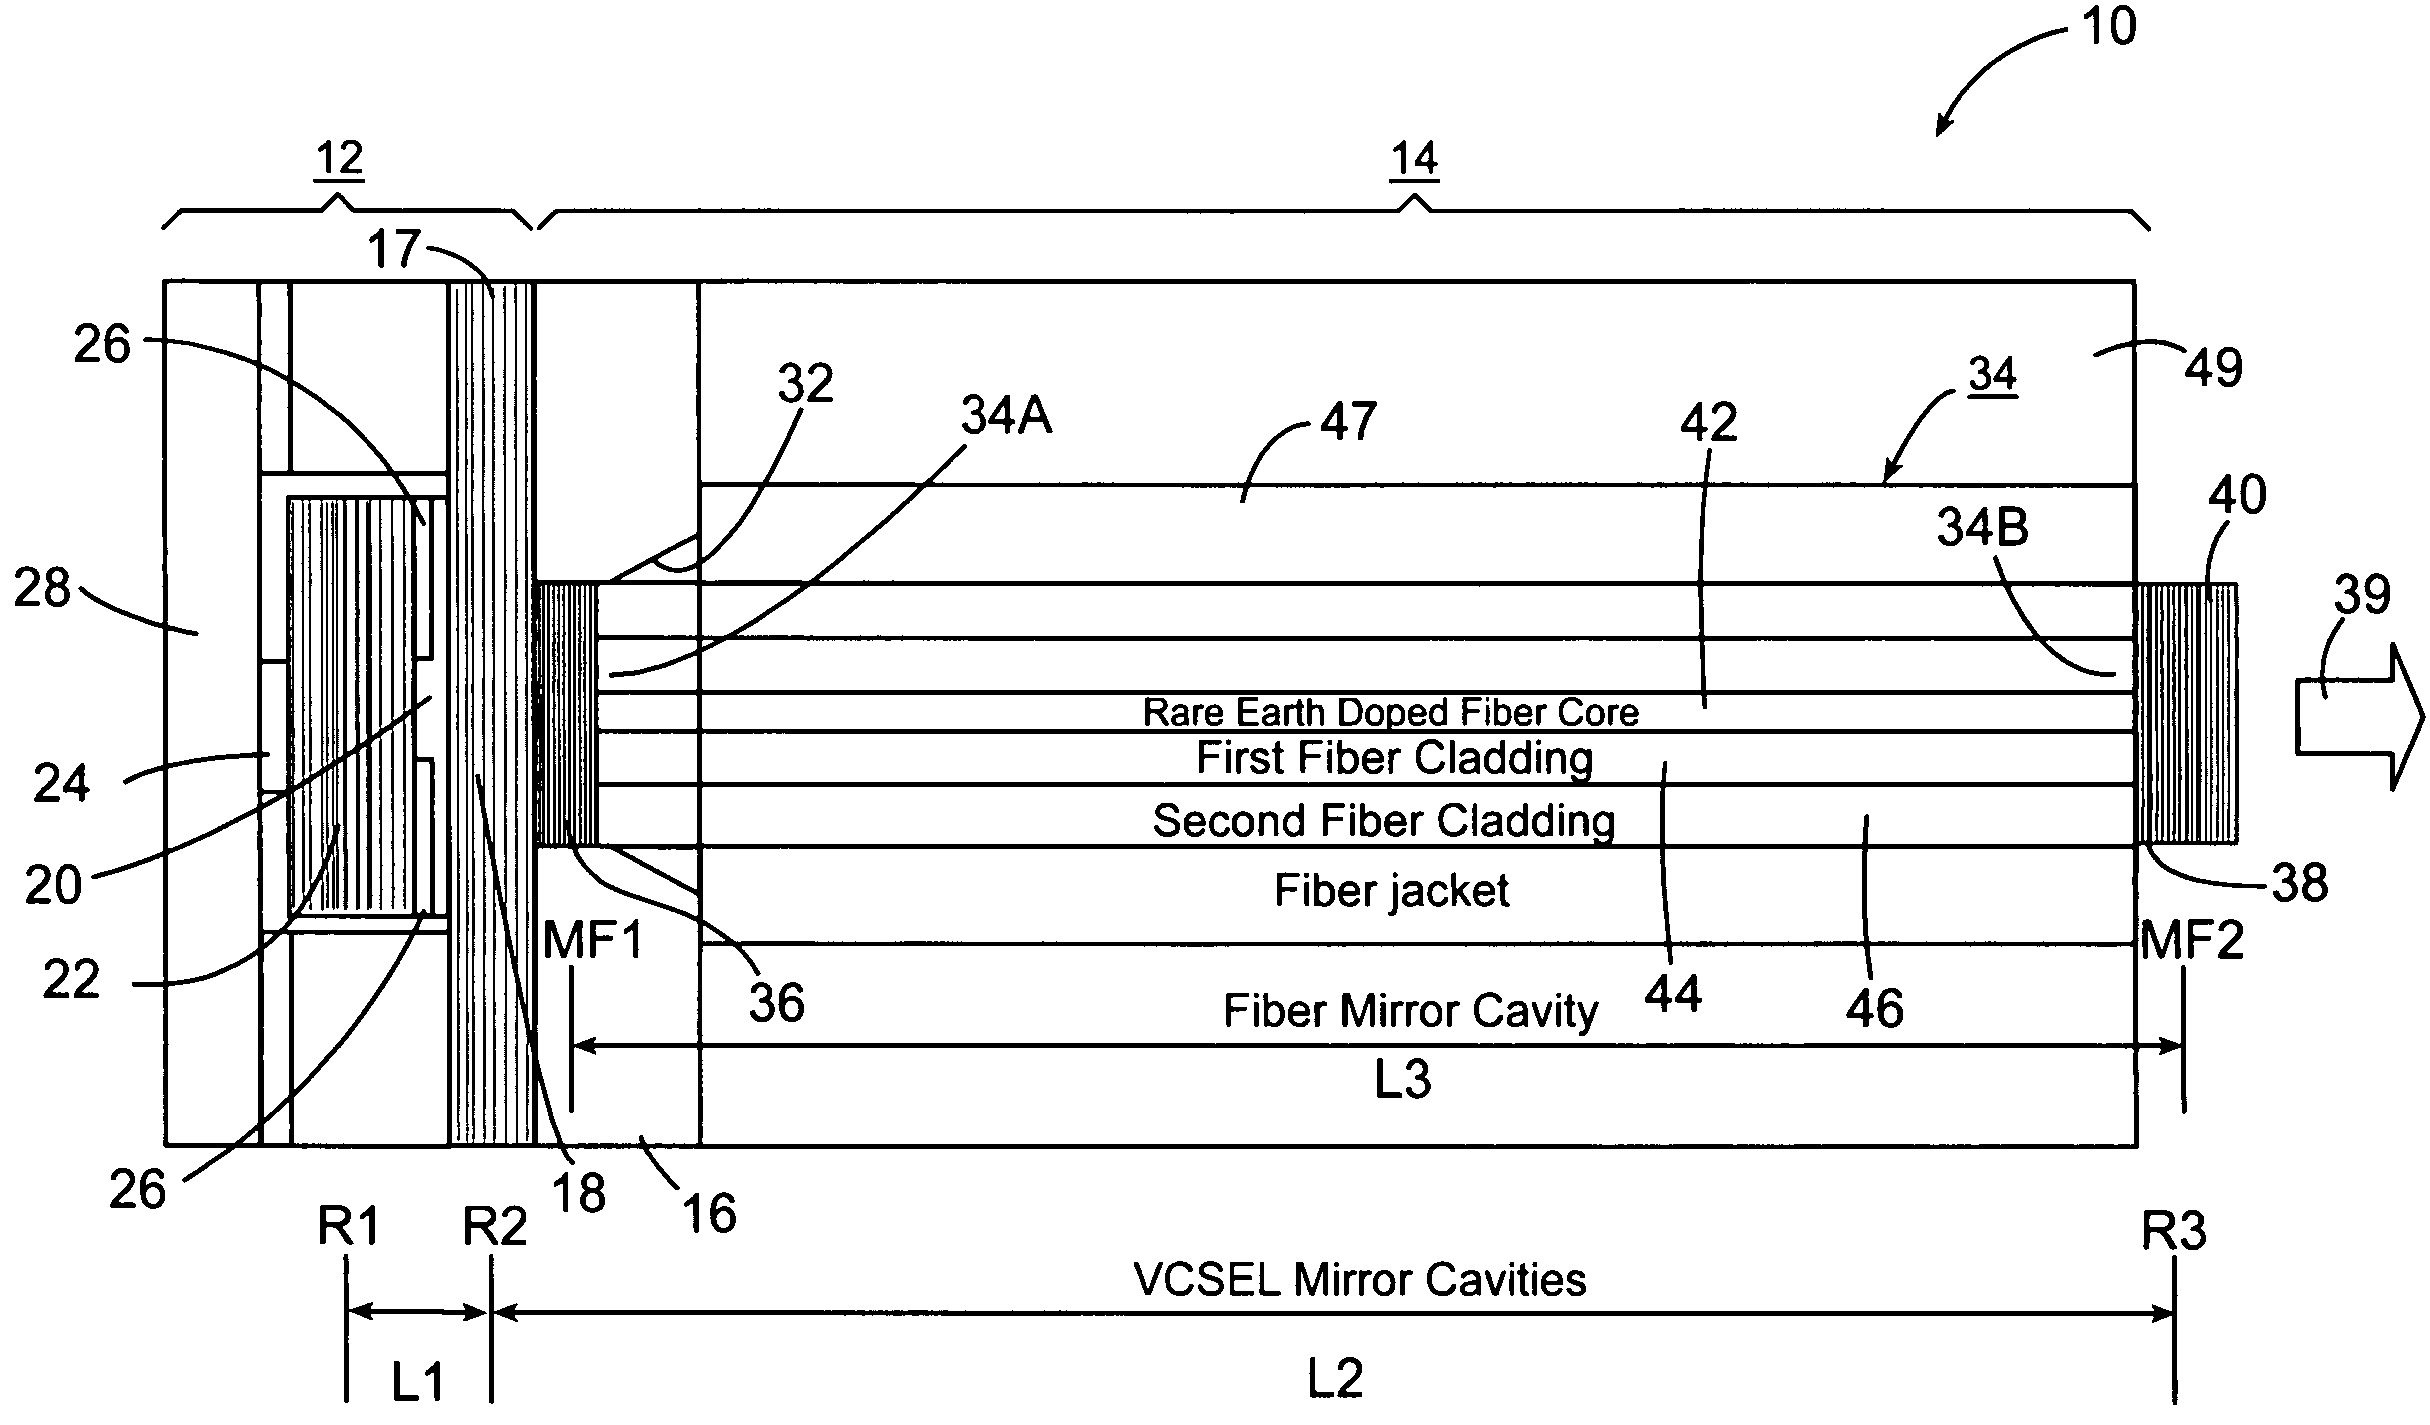 Optical spectroscopy apparatus and method for measurement of analyte concentrations or other such species in a specimen employing a semiconductor laser-pumped, small-cavity fiber laser